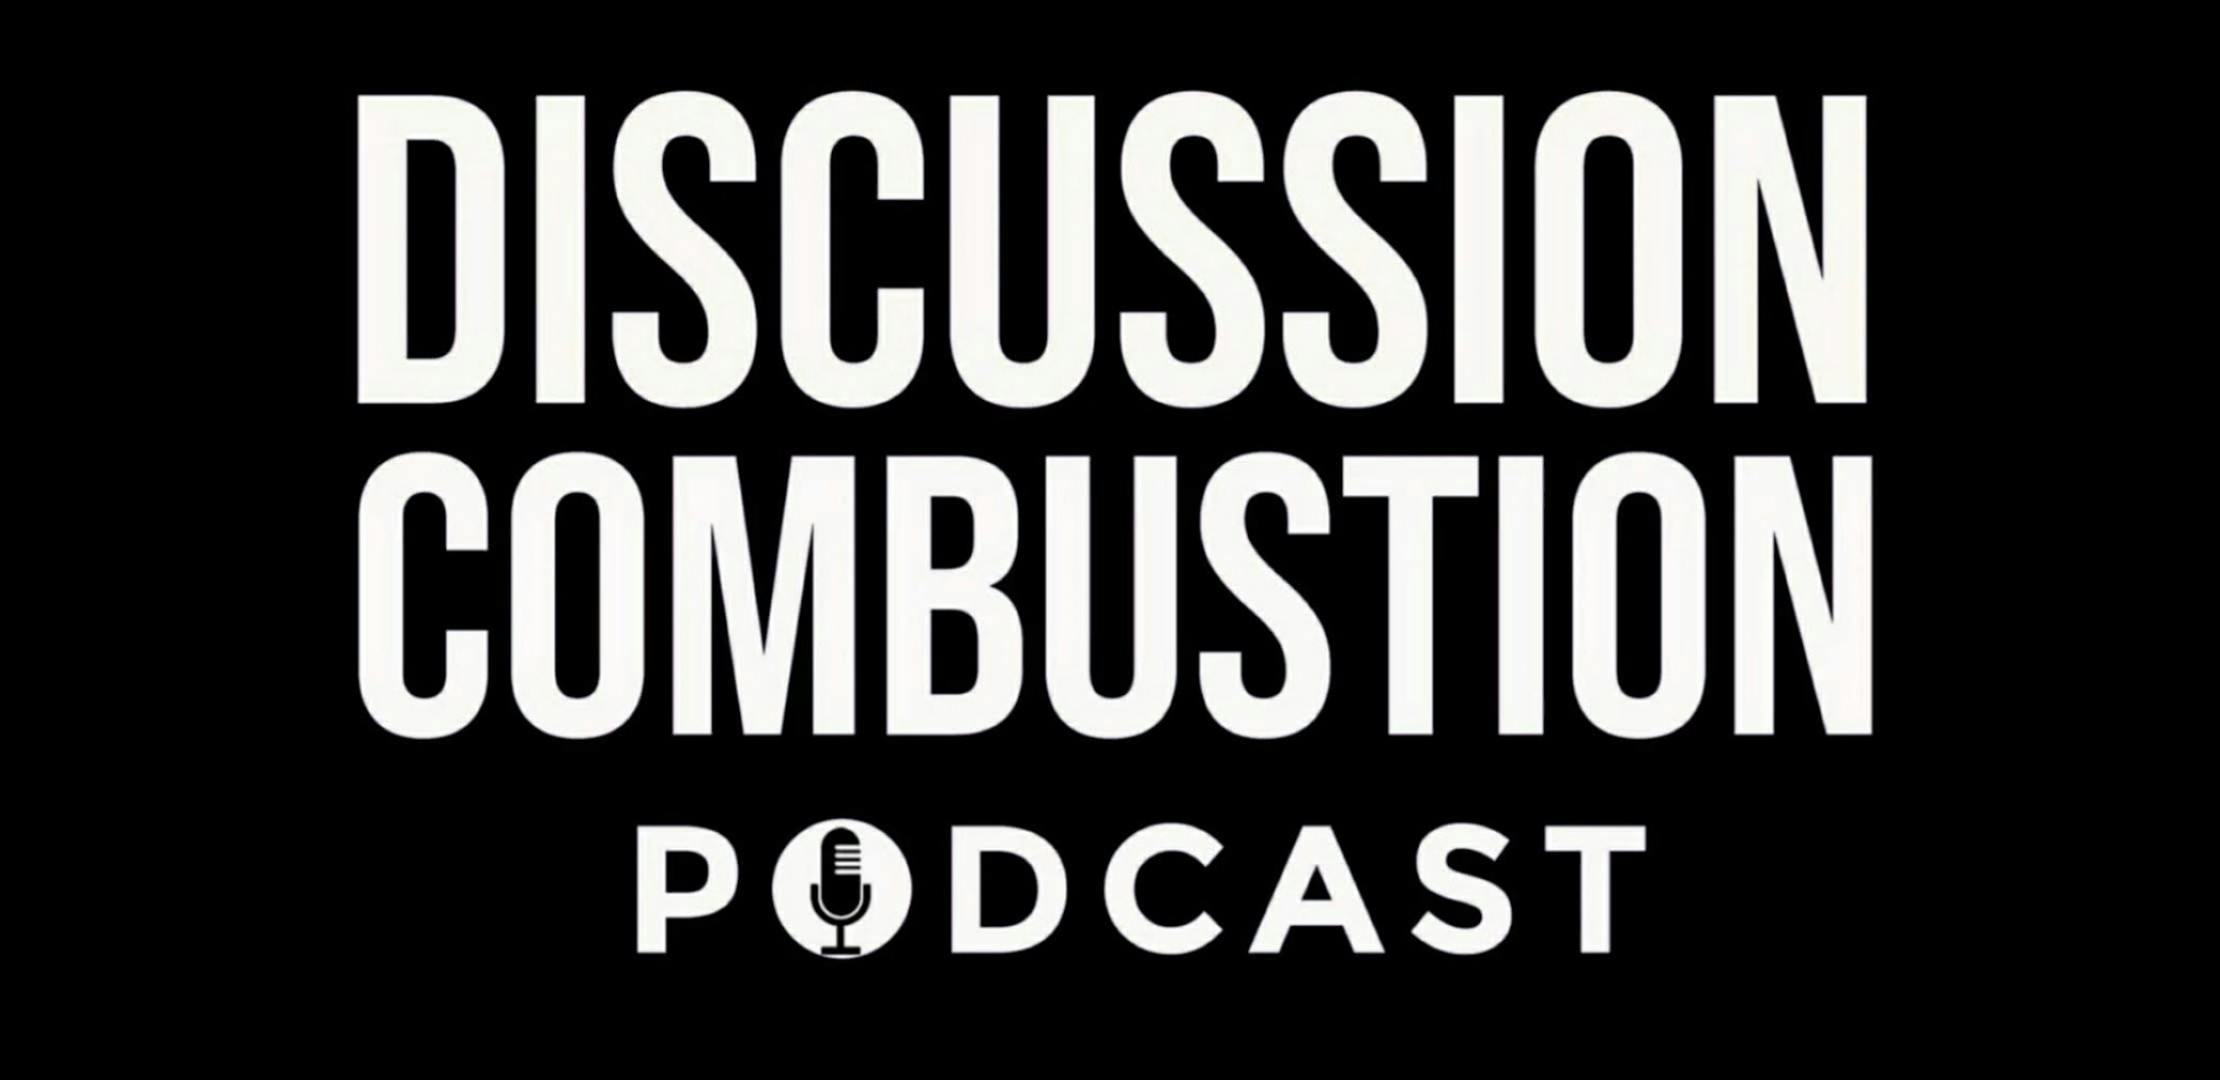 Discussion Combustion Podcast Banner Image